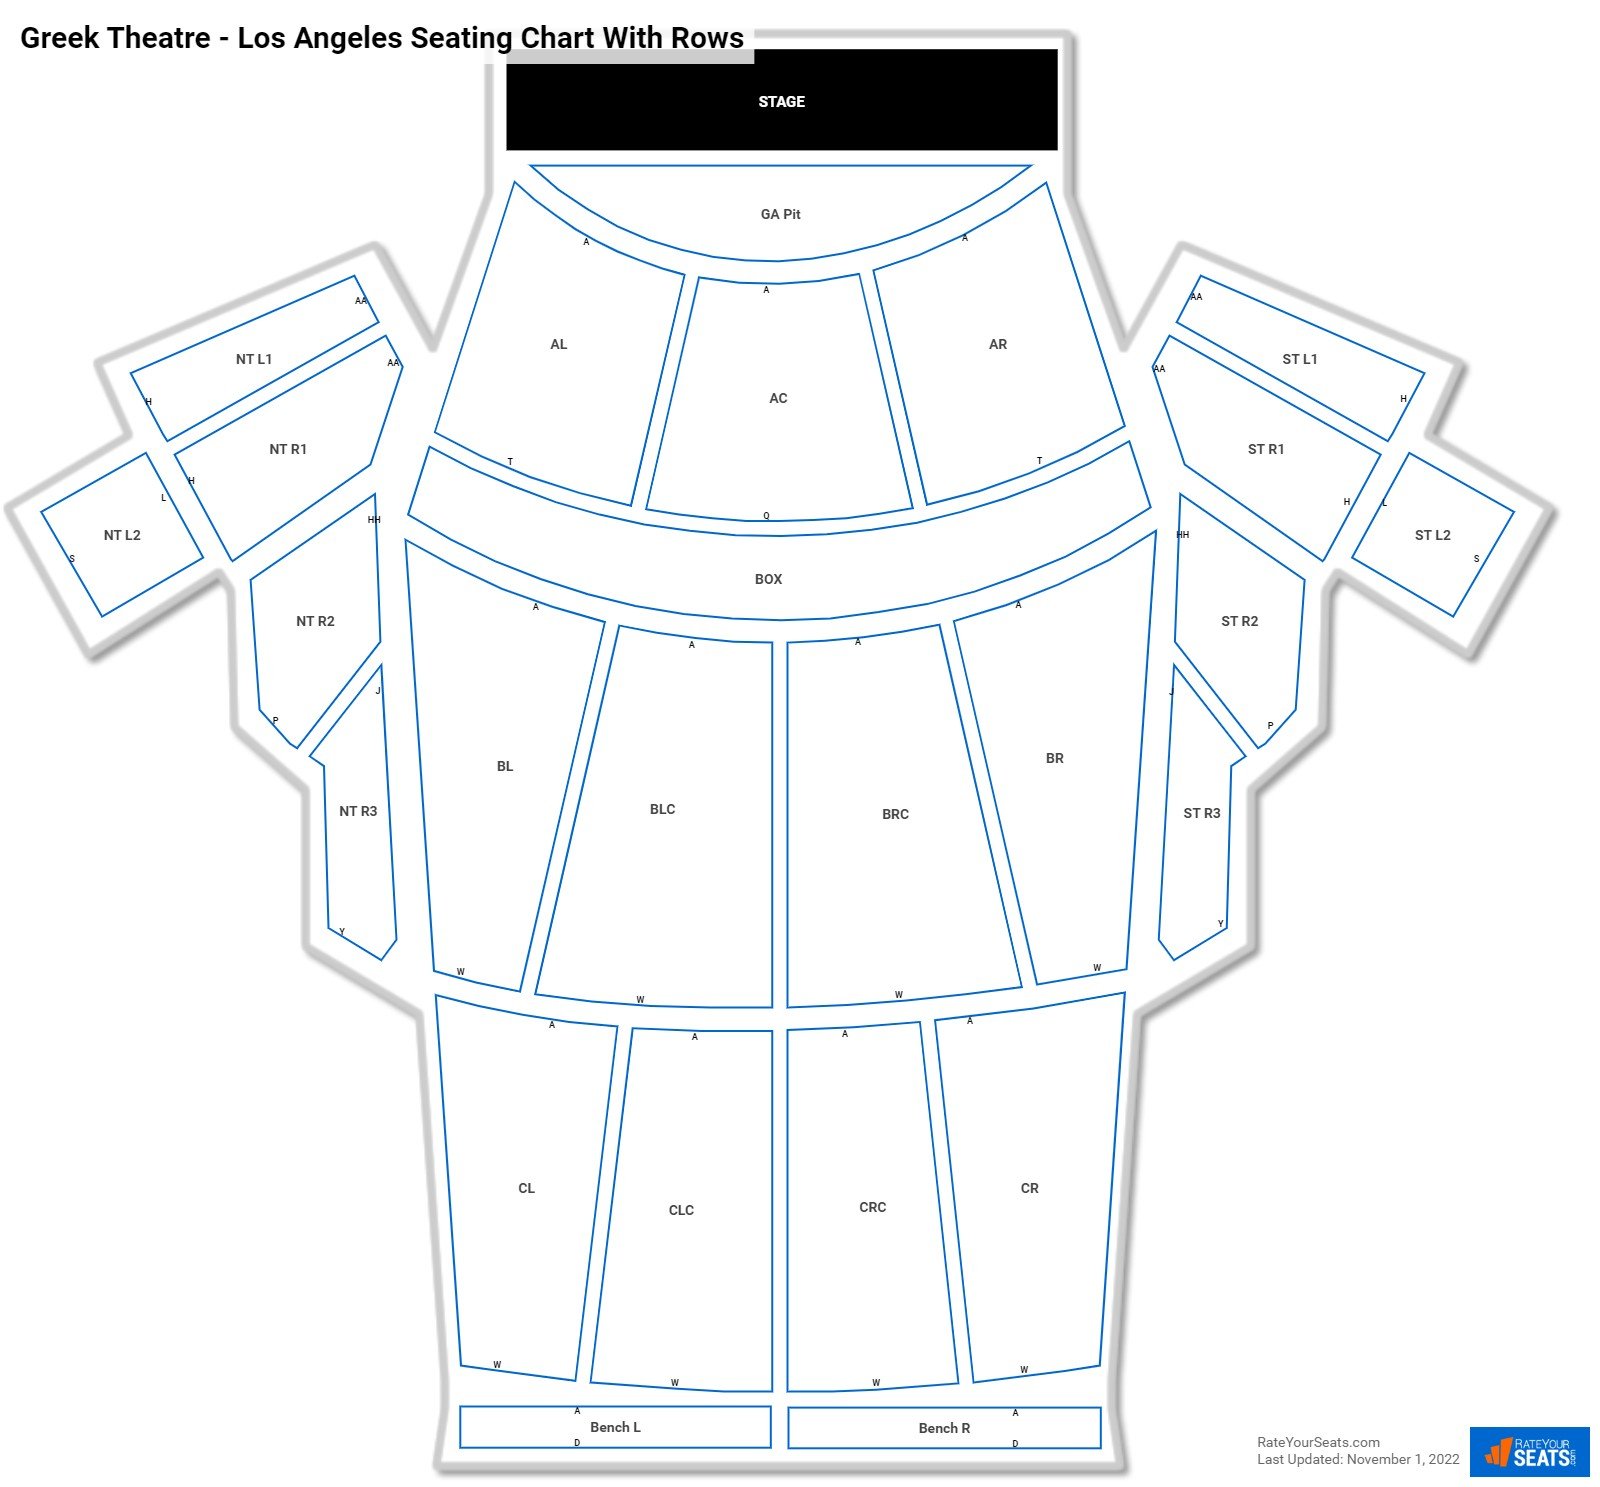 Greek Theatre - Los Angeles seating chart with row numbers